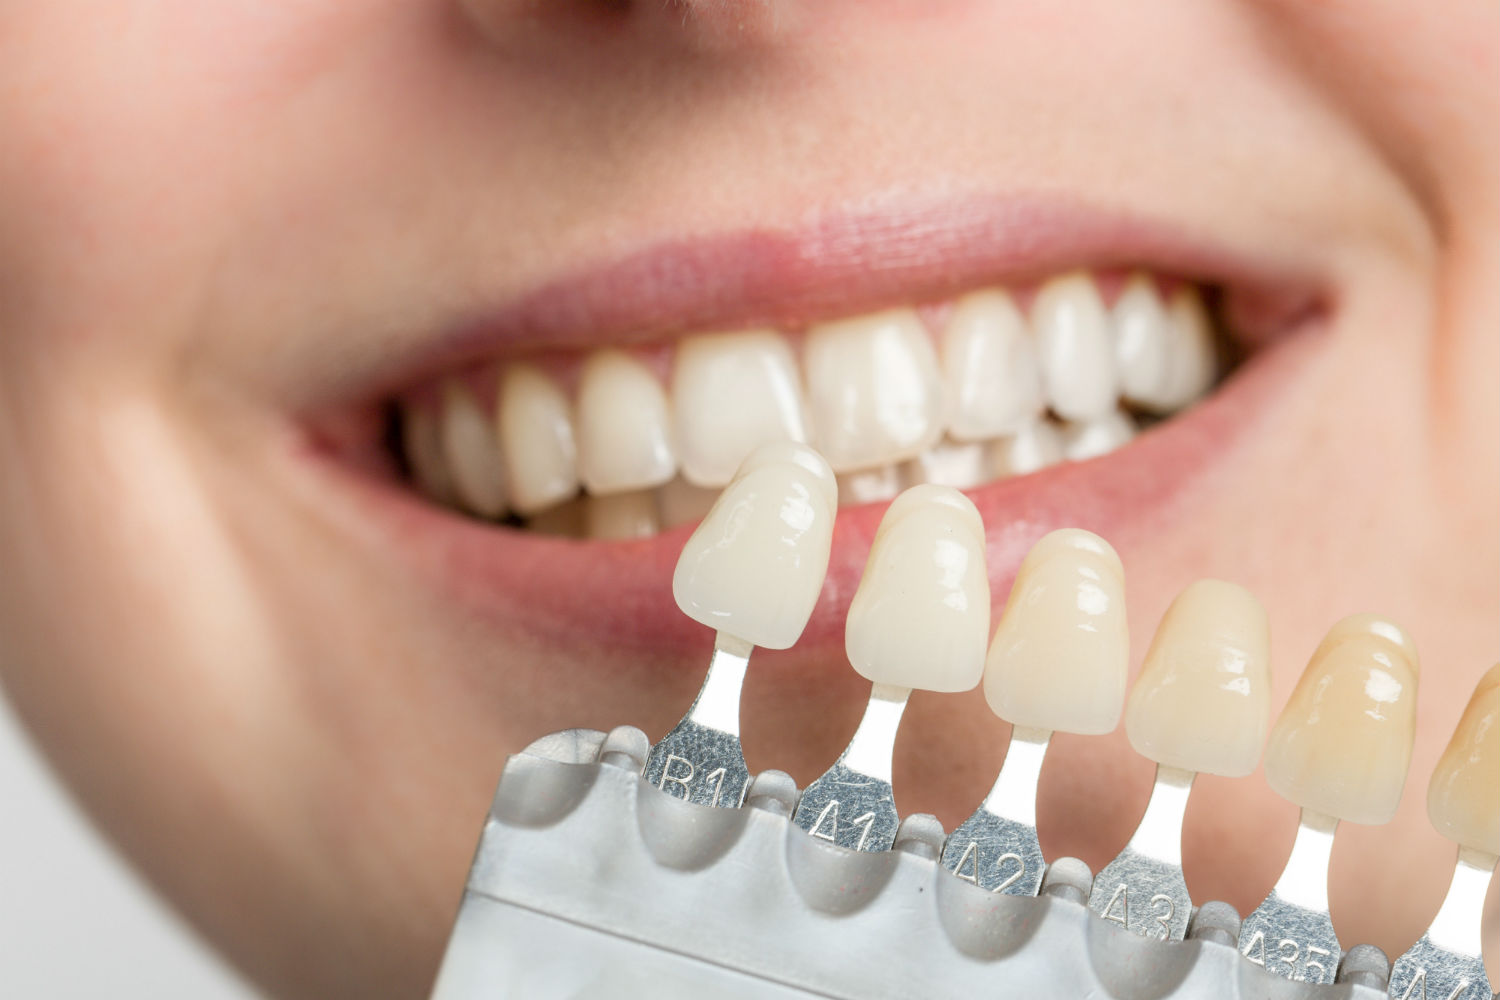 Facts You Need To Have Account Of About Oral Health